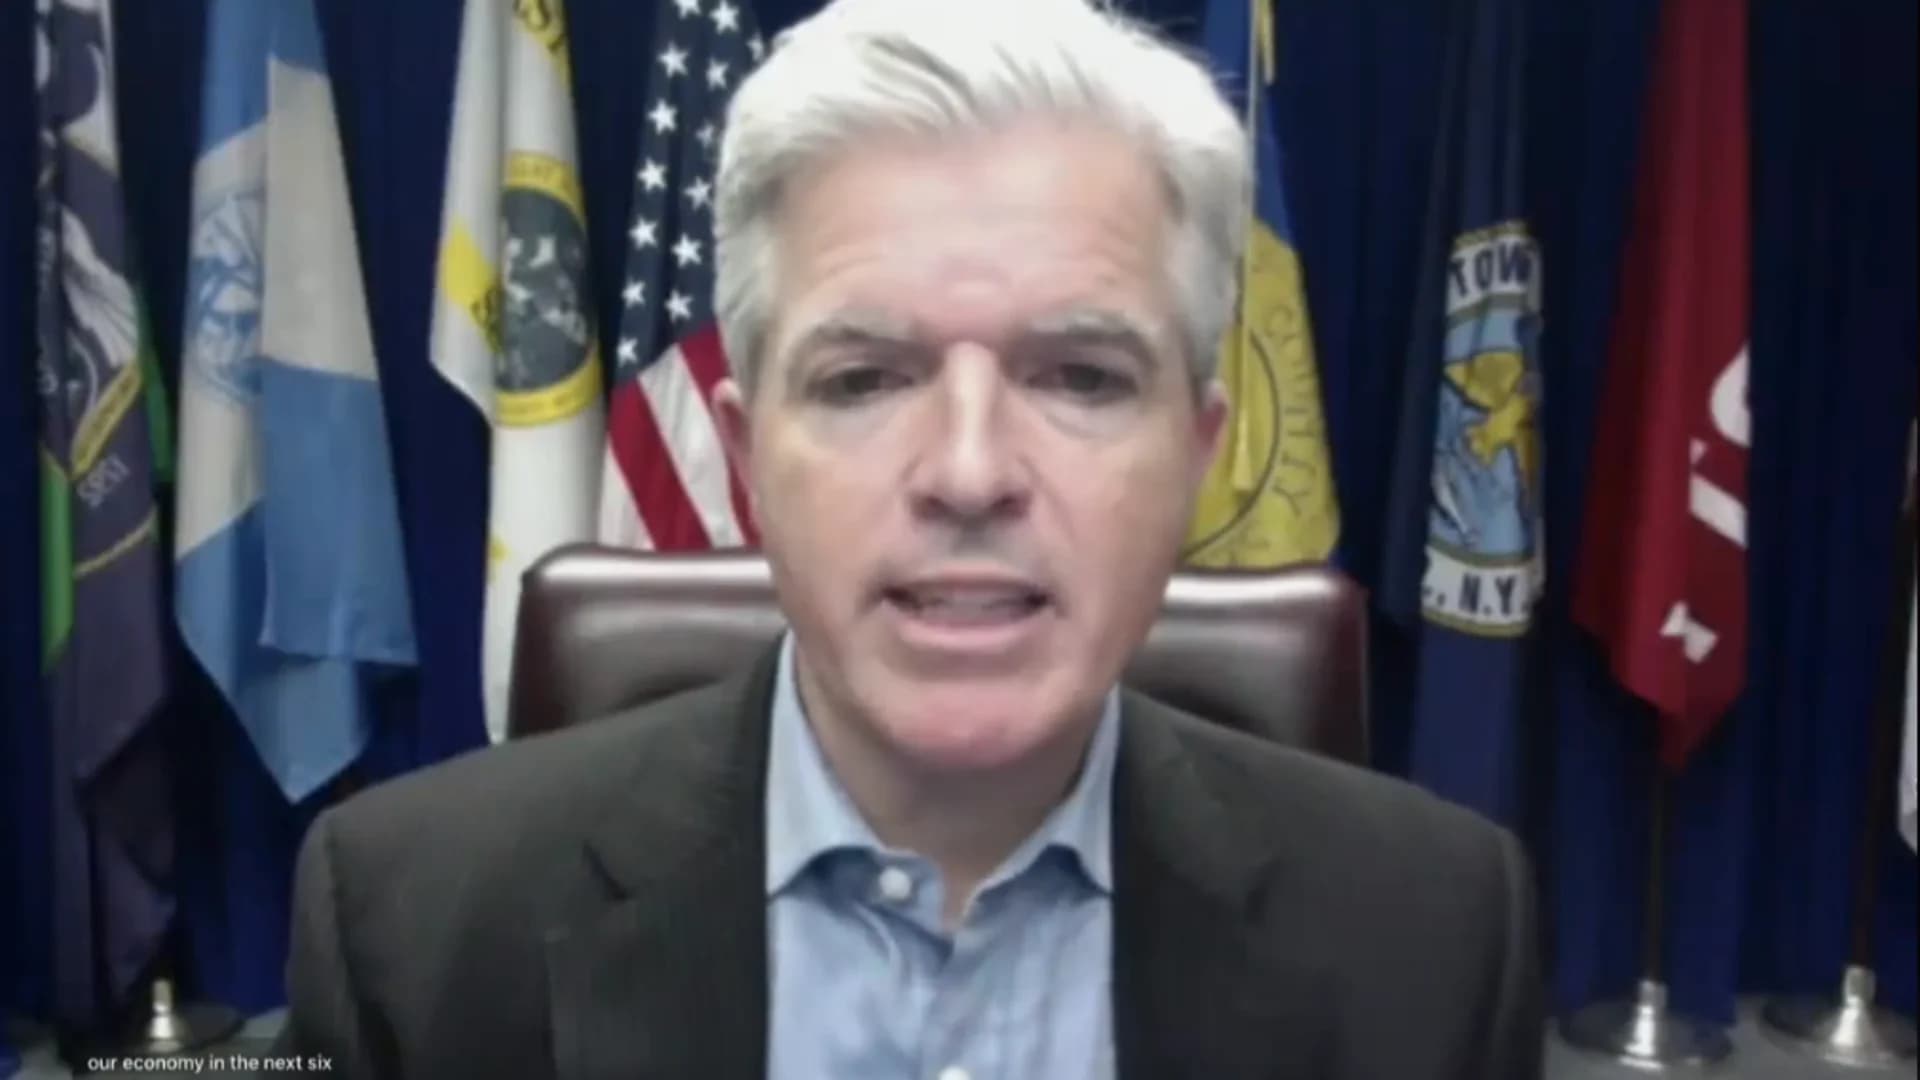 County Executive Bellone: 'I fundamentally respect' right to protest, 'but do it safely'